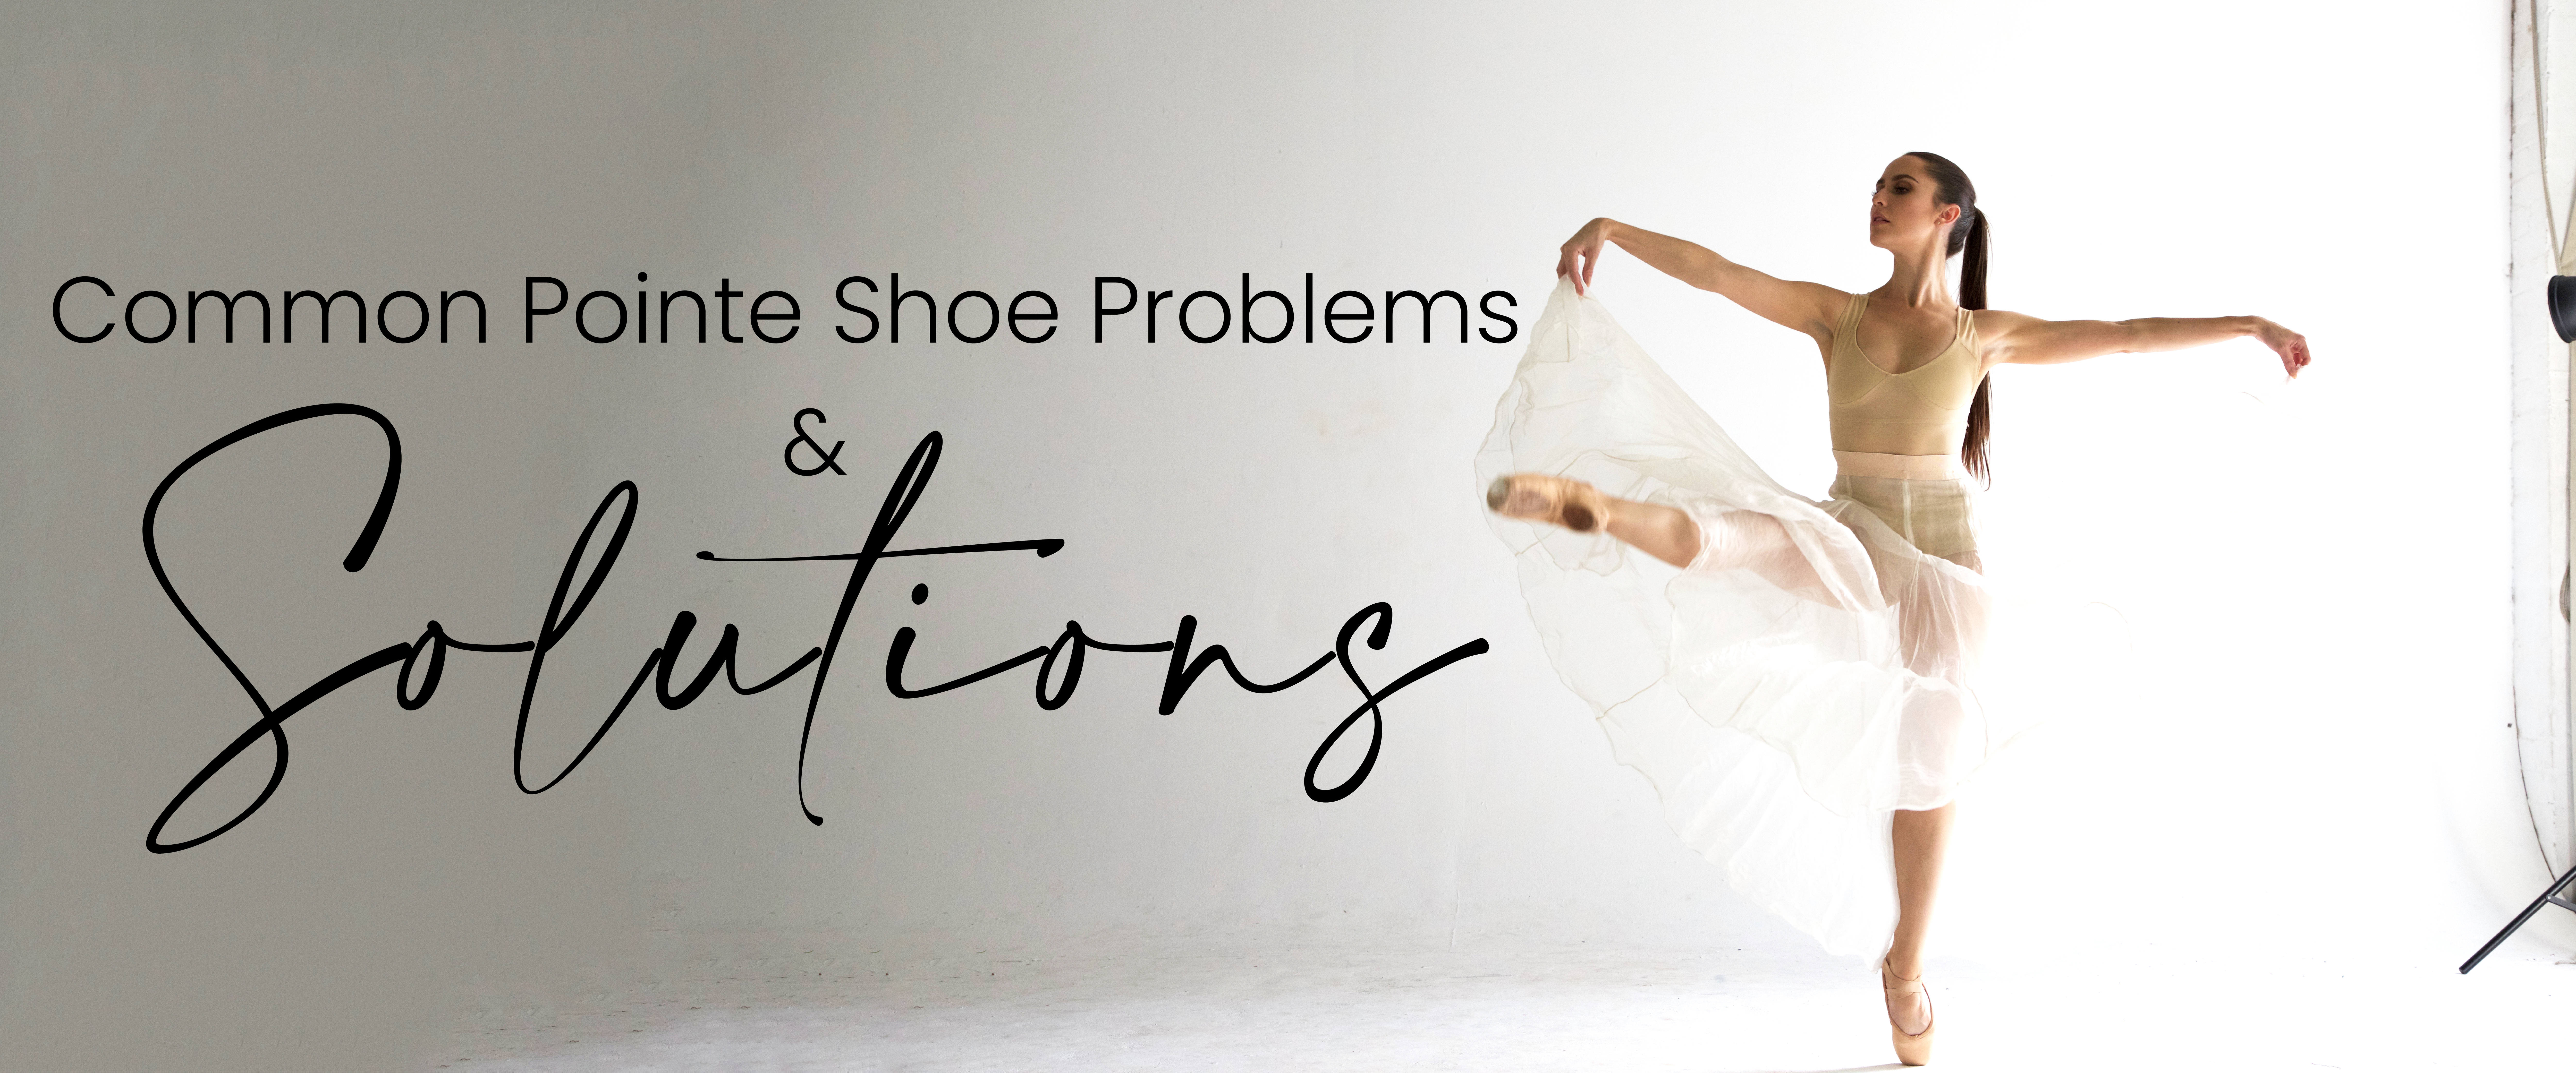 Pointe Shoe problems & solutions